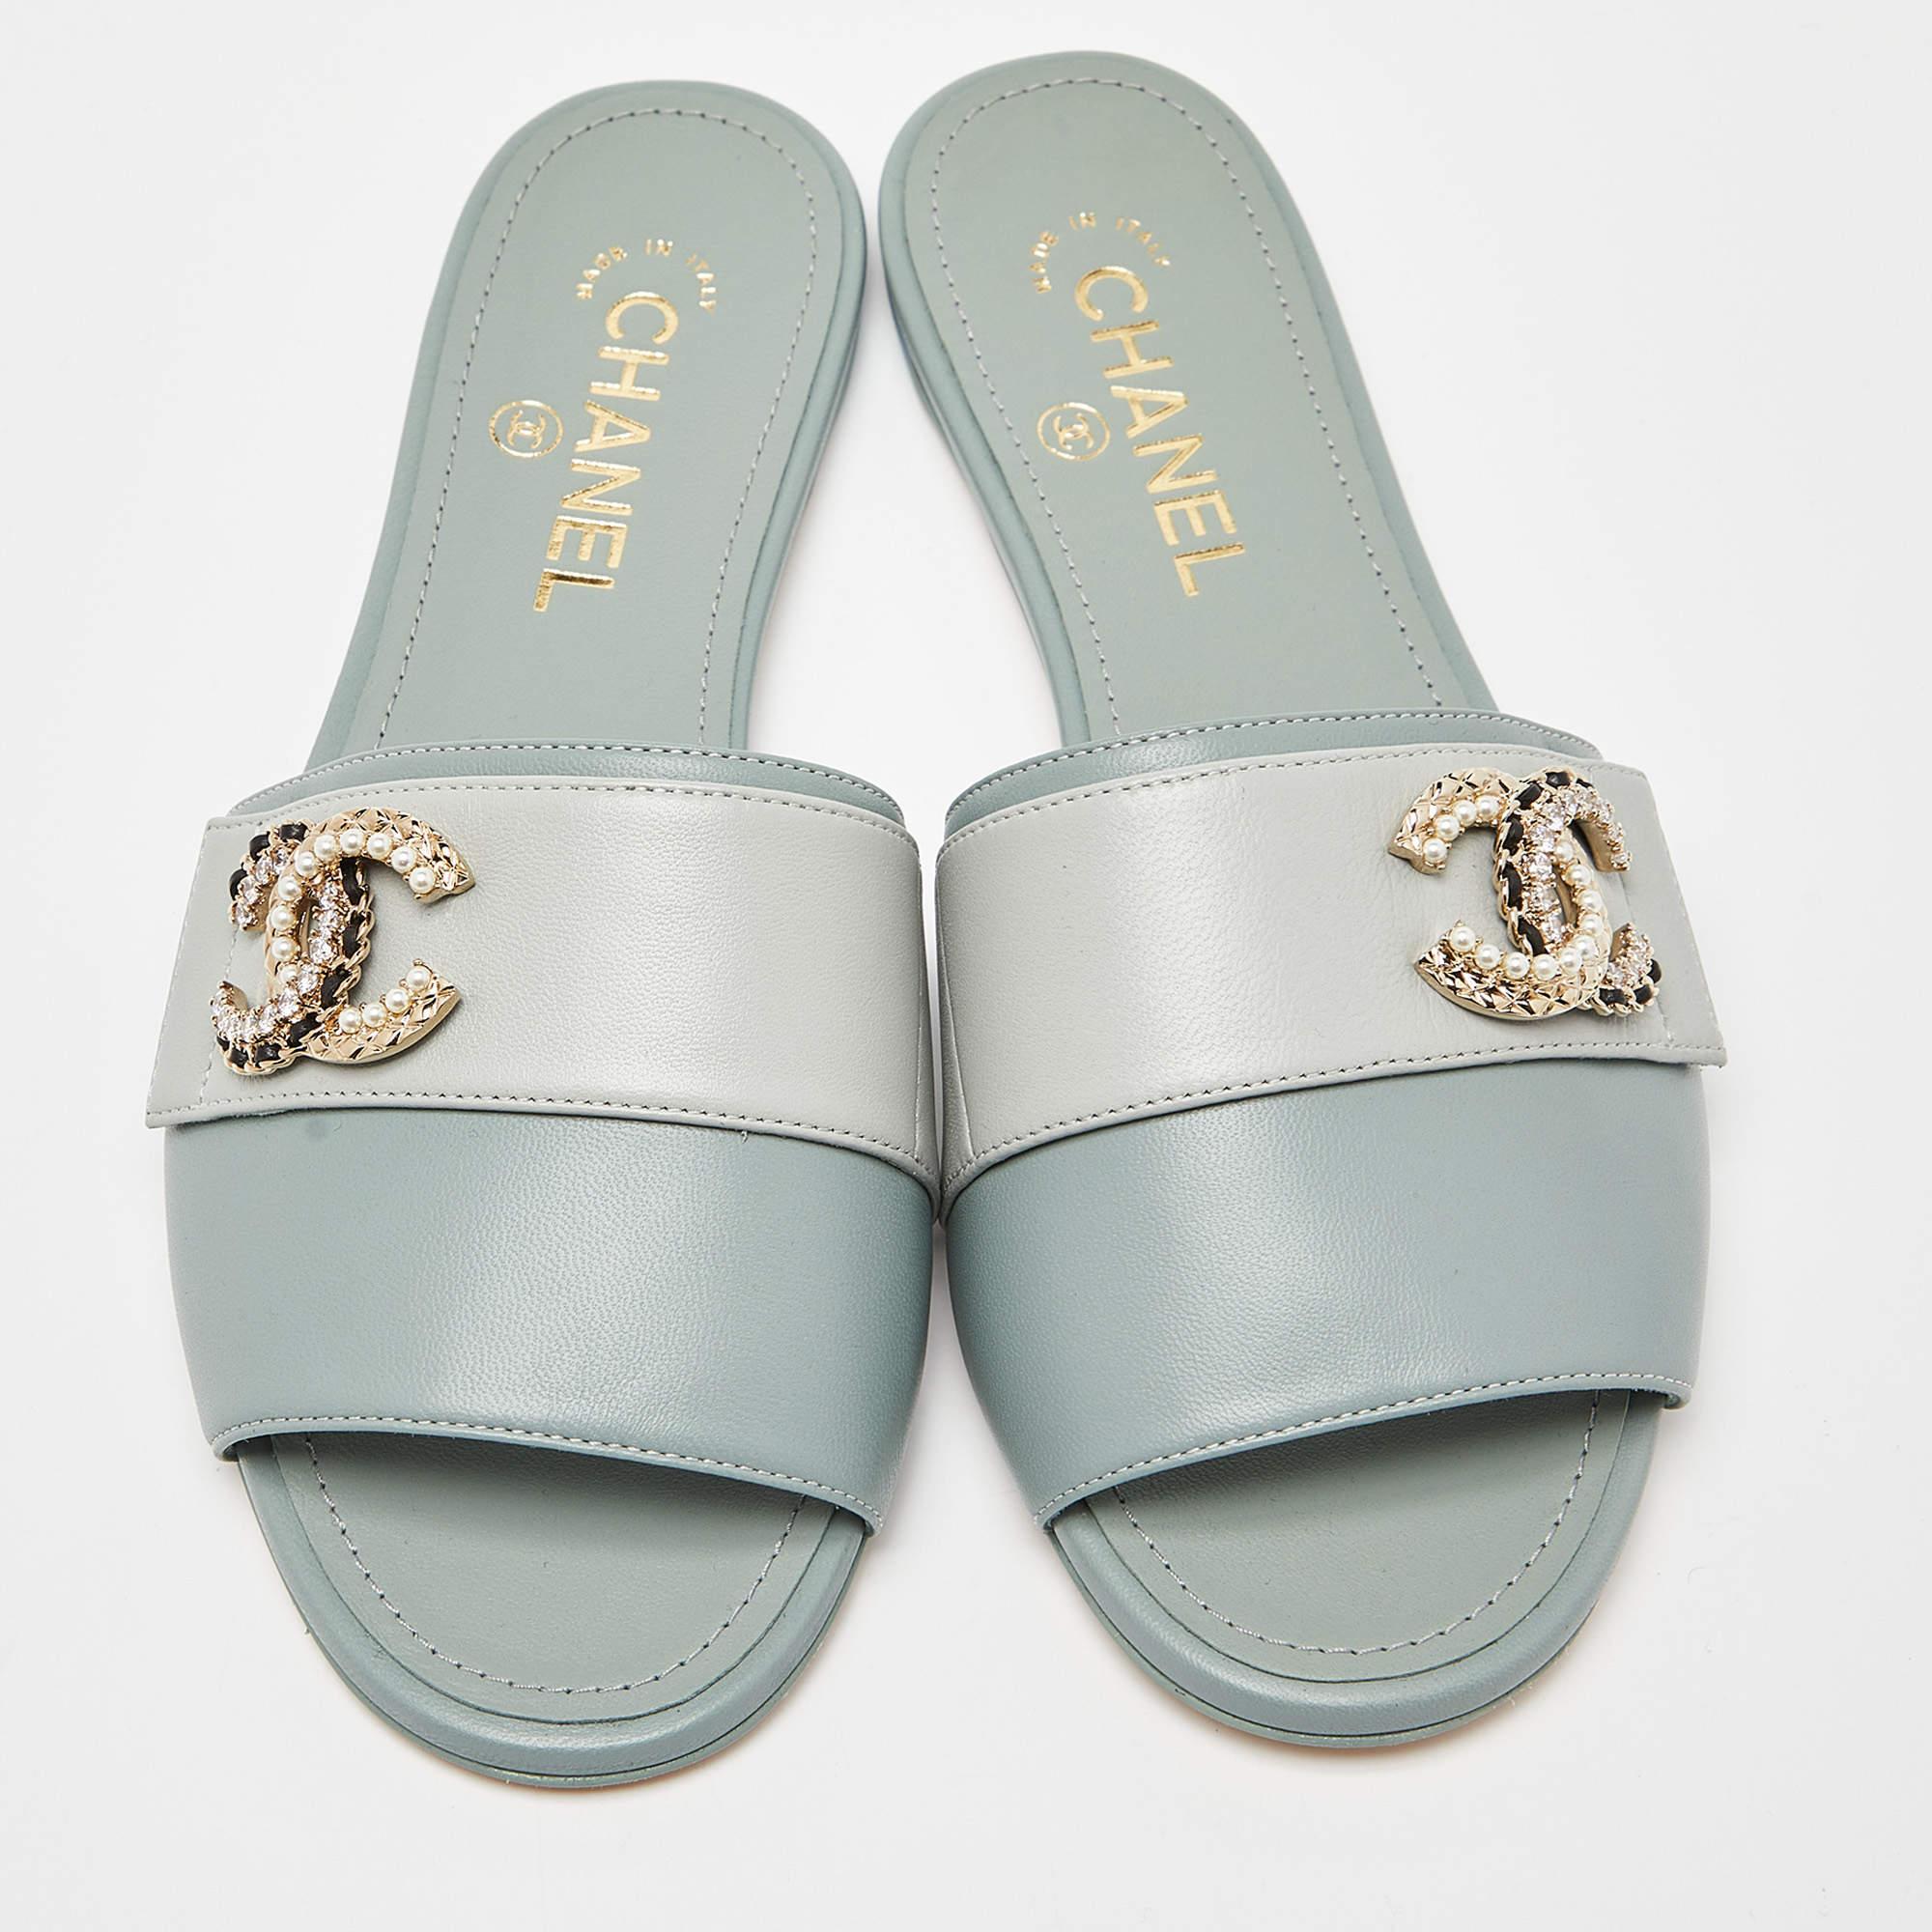 These Chanel flat slides are all about comfort and style! The design involves a CC-detailed pearl embellished upper crafted from leather and durable leather sole for lasting wear. The slip-on style makes the pair convenient to use.

Includes: